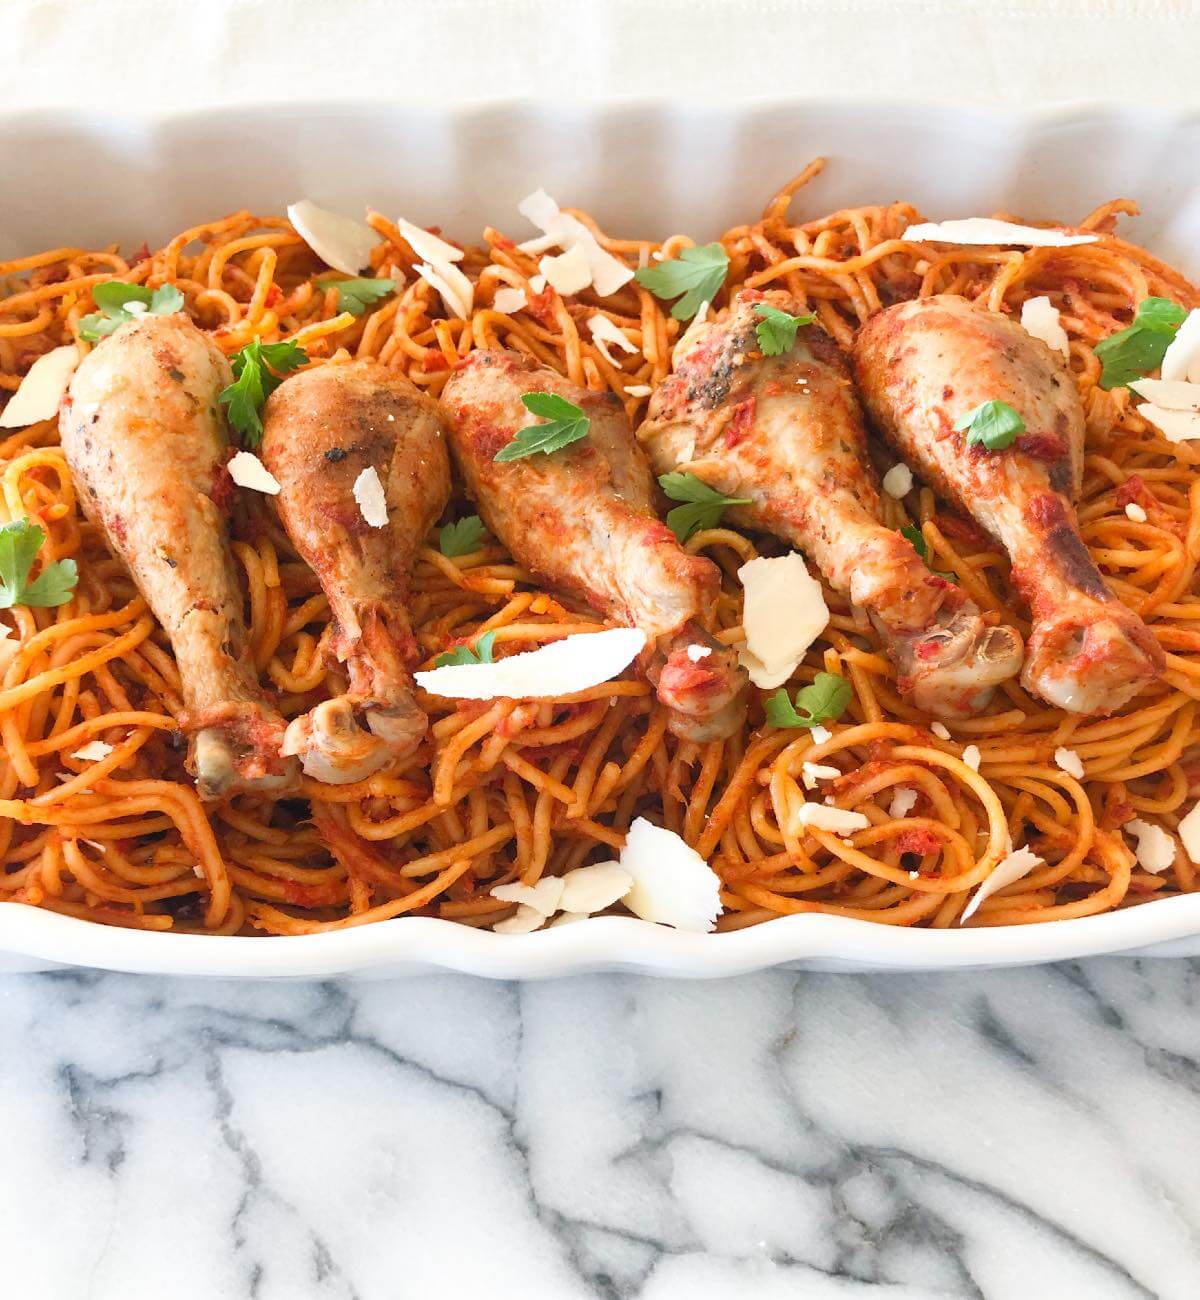 cooked chicken drumsticks and spaghetti with tomato sauce in a serving dish